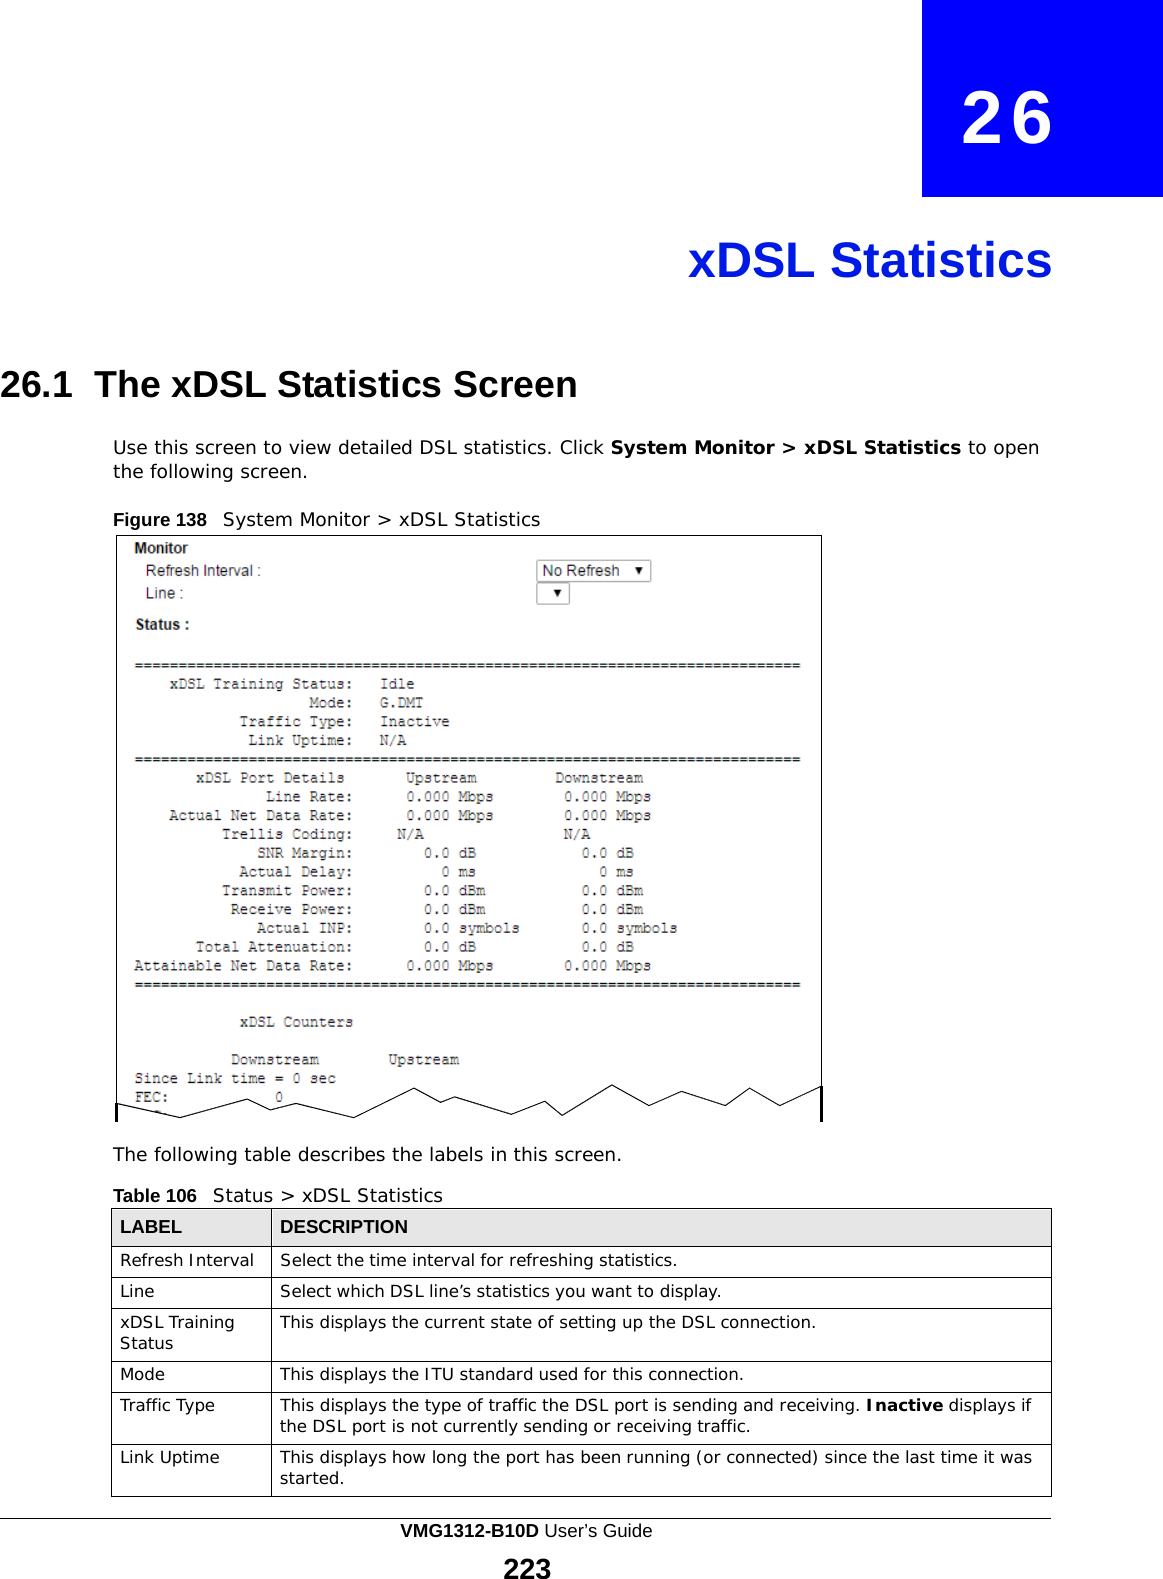    26     xDSL Statistics     26.1  The xDSL Statistics Screen  Use this screen to view detailed DSL statistics. Click System Monitor &gt; xDSL Statistics to open the following screen.  Figure 138   System Monitor &gt; xDSL Statistics                              The following table describes the labels in this screen.  Table 106   Status &gt; xDSL Statistics  LABEL DESCRIPTION Refresh Interval Select the time interval for refreshing statistics. Line Select which DSL line’s statistics you want to display. xDSL Training Status This displays the current state of setting up the DSL connection. Mode This displays the ITU standard used for this connection. Traffic Type This displays the type of traffic the DSL port is sending and receiving. Inactive displays if the DSL port is not currently sending or receiving traffic. Link Uptime This displays how long the port has been running (or connected) since the last time it was started. VMG1312-B10D User’s Guide 223  